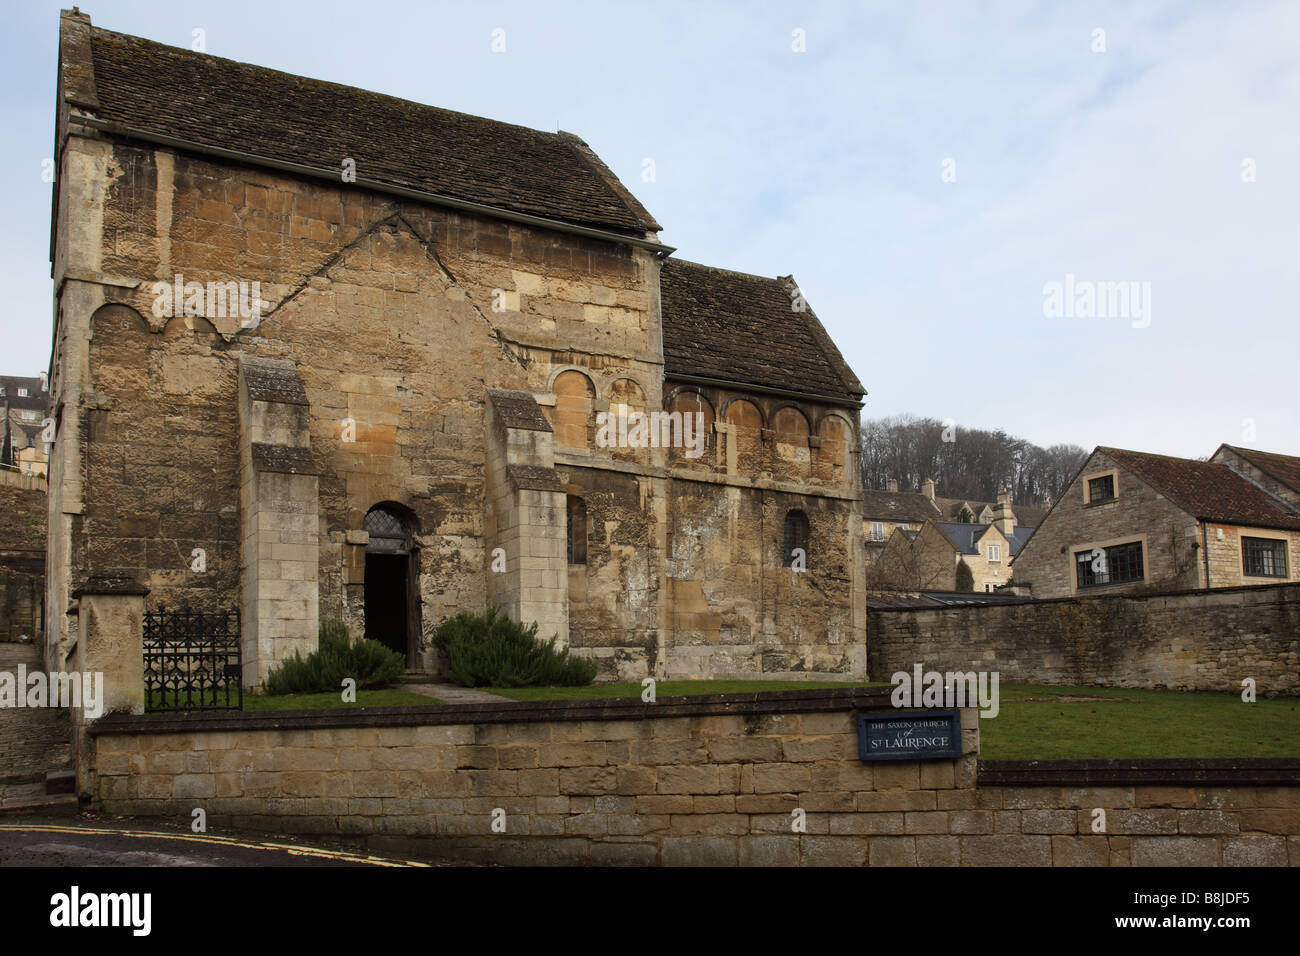 The Grade 1 Listed Anglo-Saxon church of St Laurence, Bradford on Avon, Wiltshire, England, UK Stock Photo